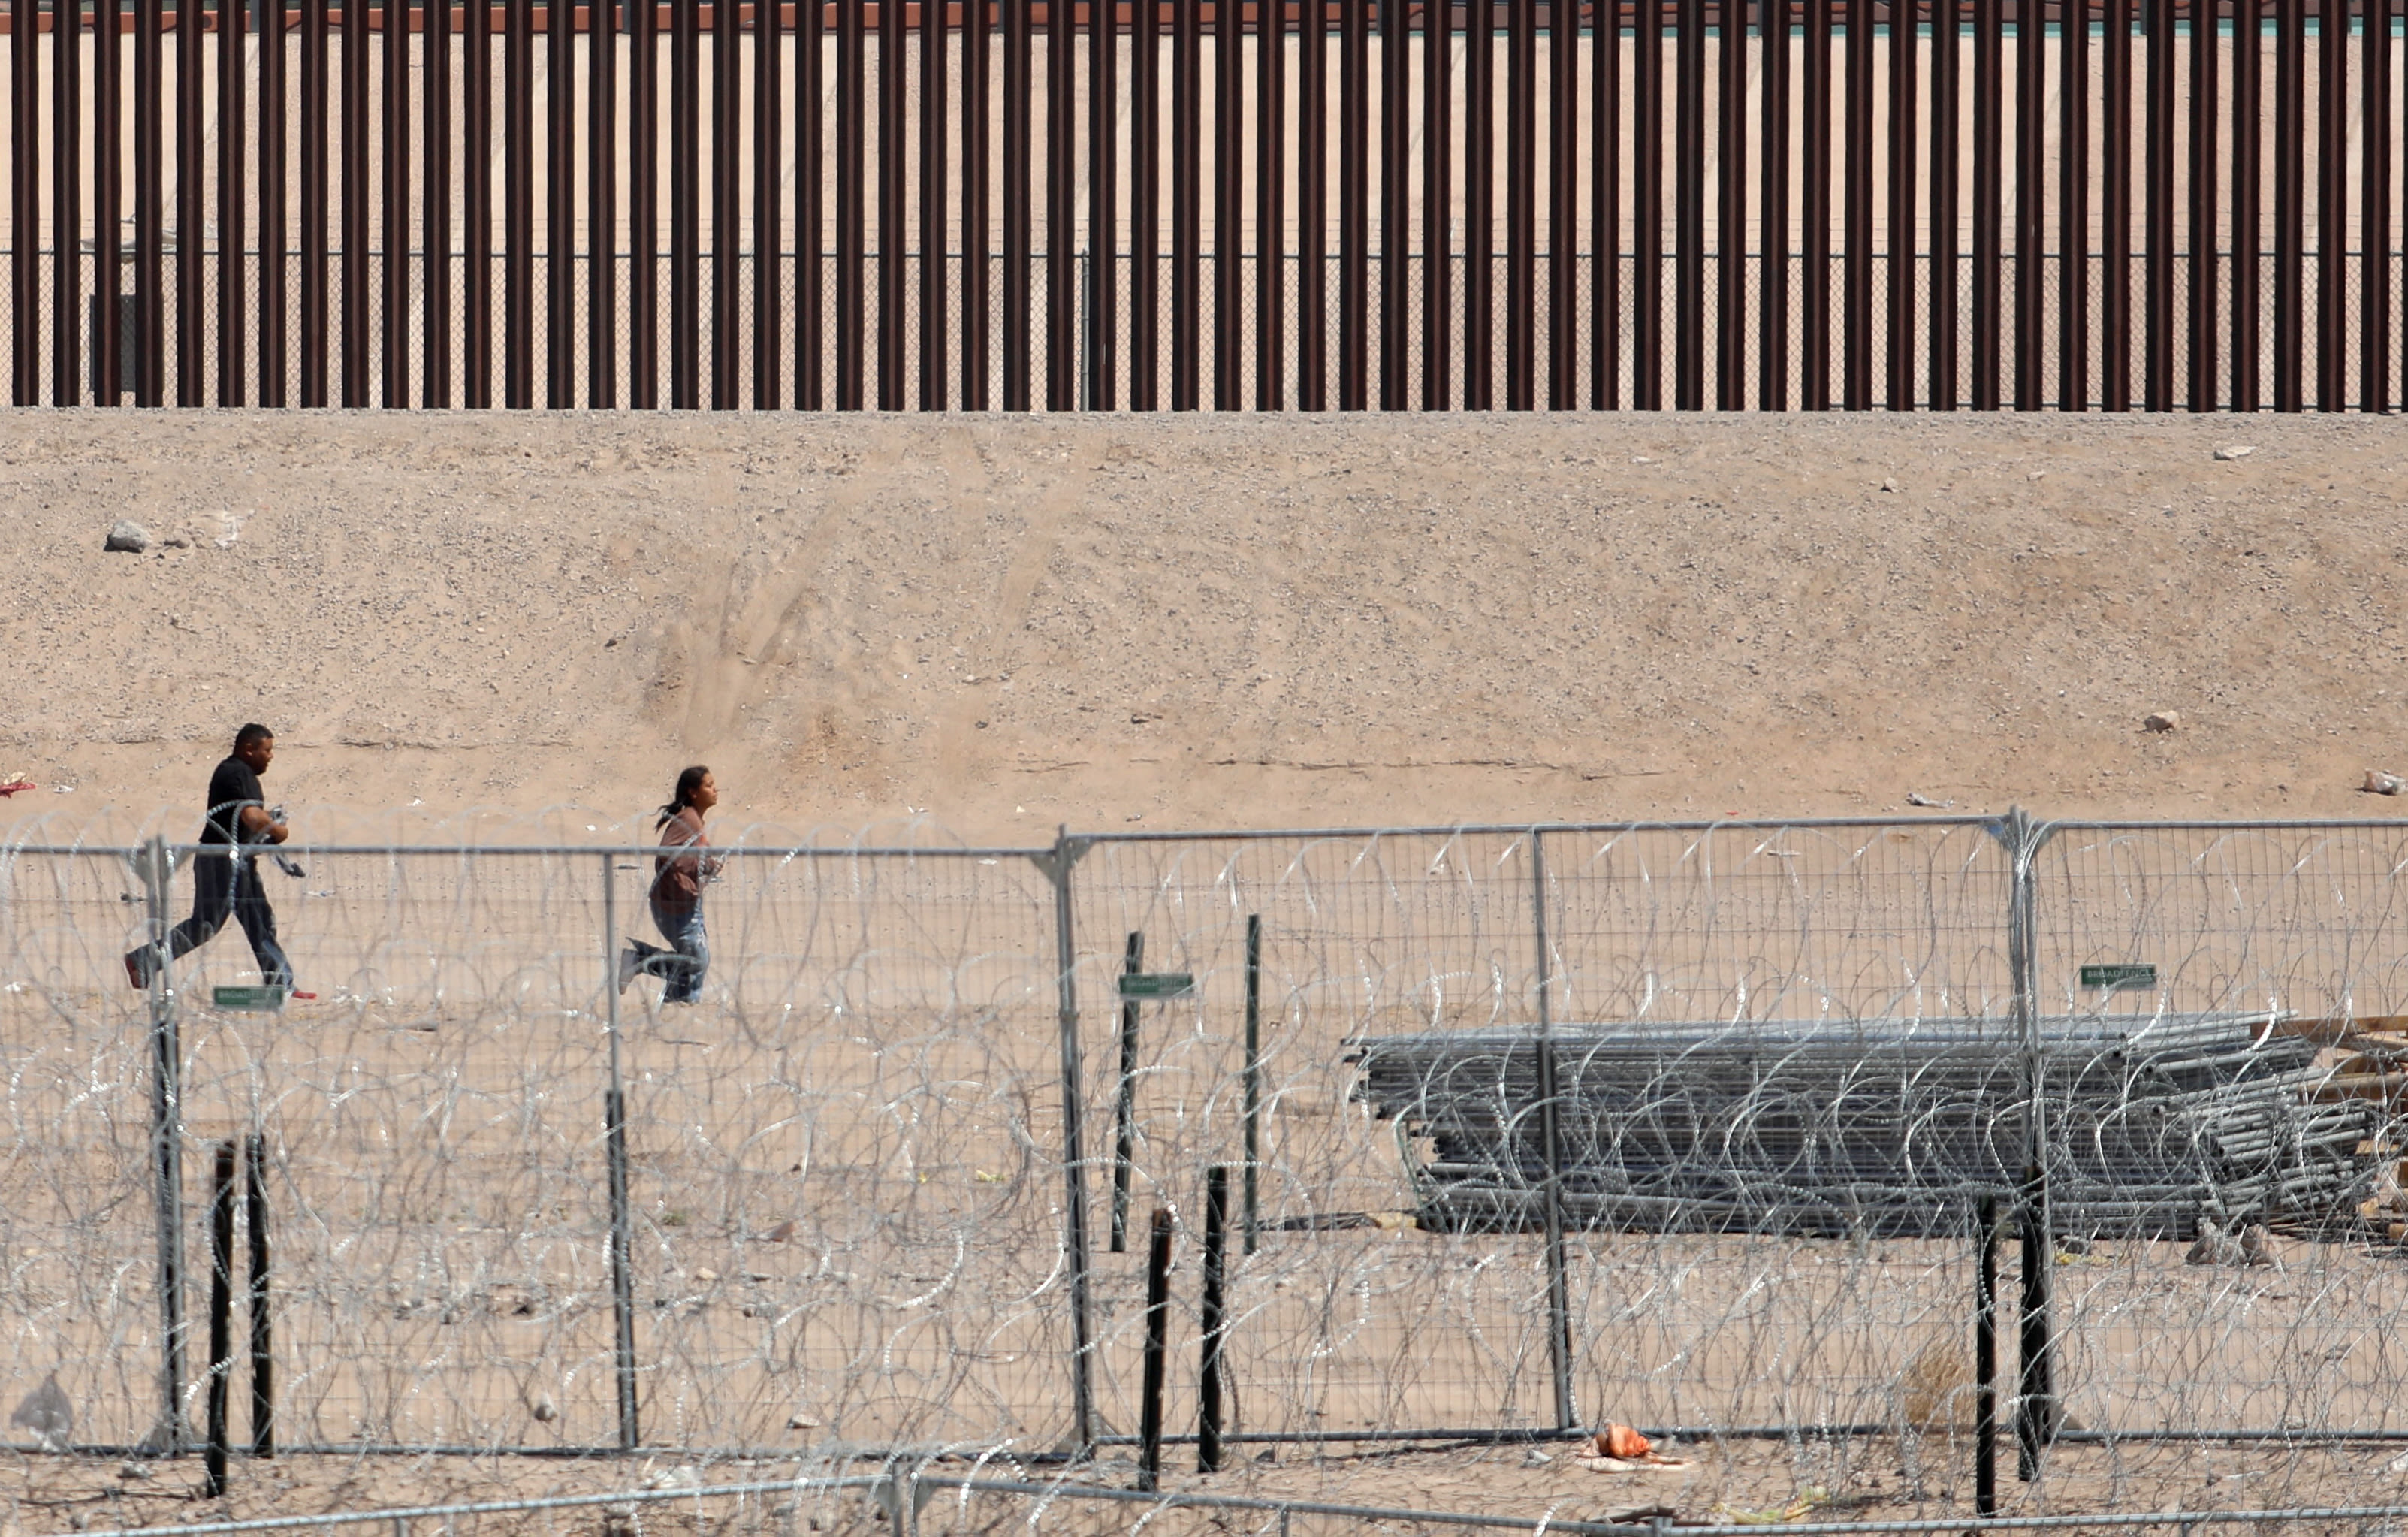 Video shows migrants rush border wall, try to climb over